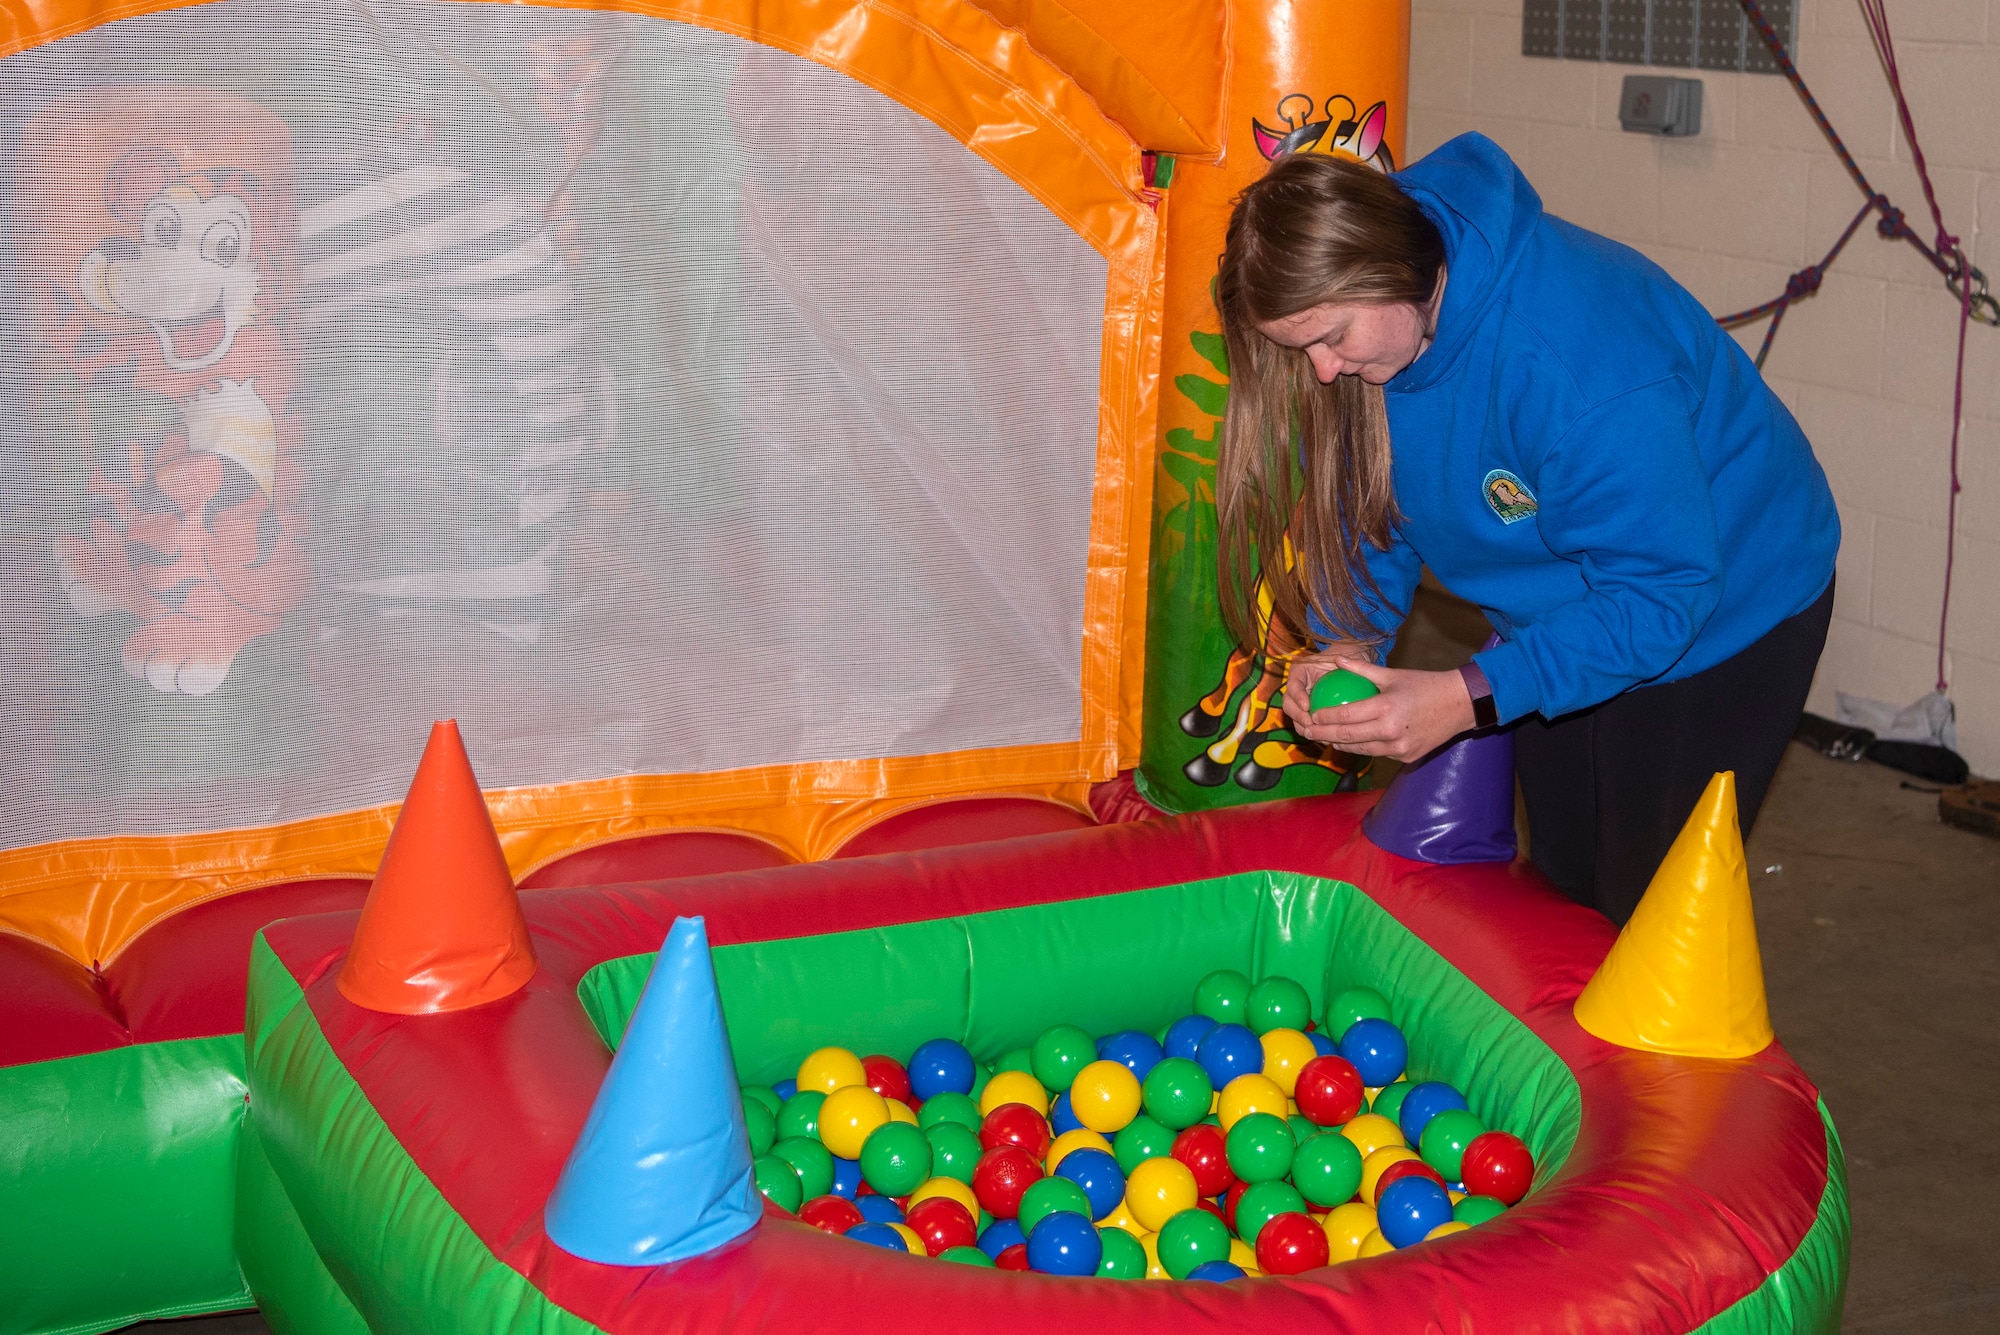 Kim Stonebridge, 100th Force Support Squadron outdoor recreation adventure programmer, inspects the condition of a newly  arrived bouncy castle, inside the outdoor recreation center at RAF Mildenhall, England, May 11, 2020. Although the center continues to rent out certain items like yard equipment, mountain bikes and outdoor games, items that facilitate gatherings of people are not available for rental during the COVID-19 lockdown. (U.S. Air Force photo by Airman 1st Class Joseph Barron)